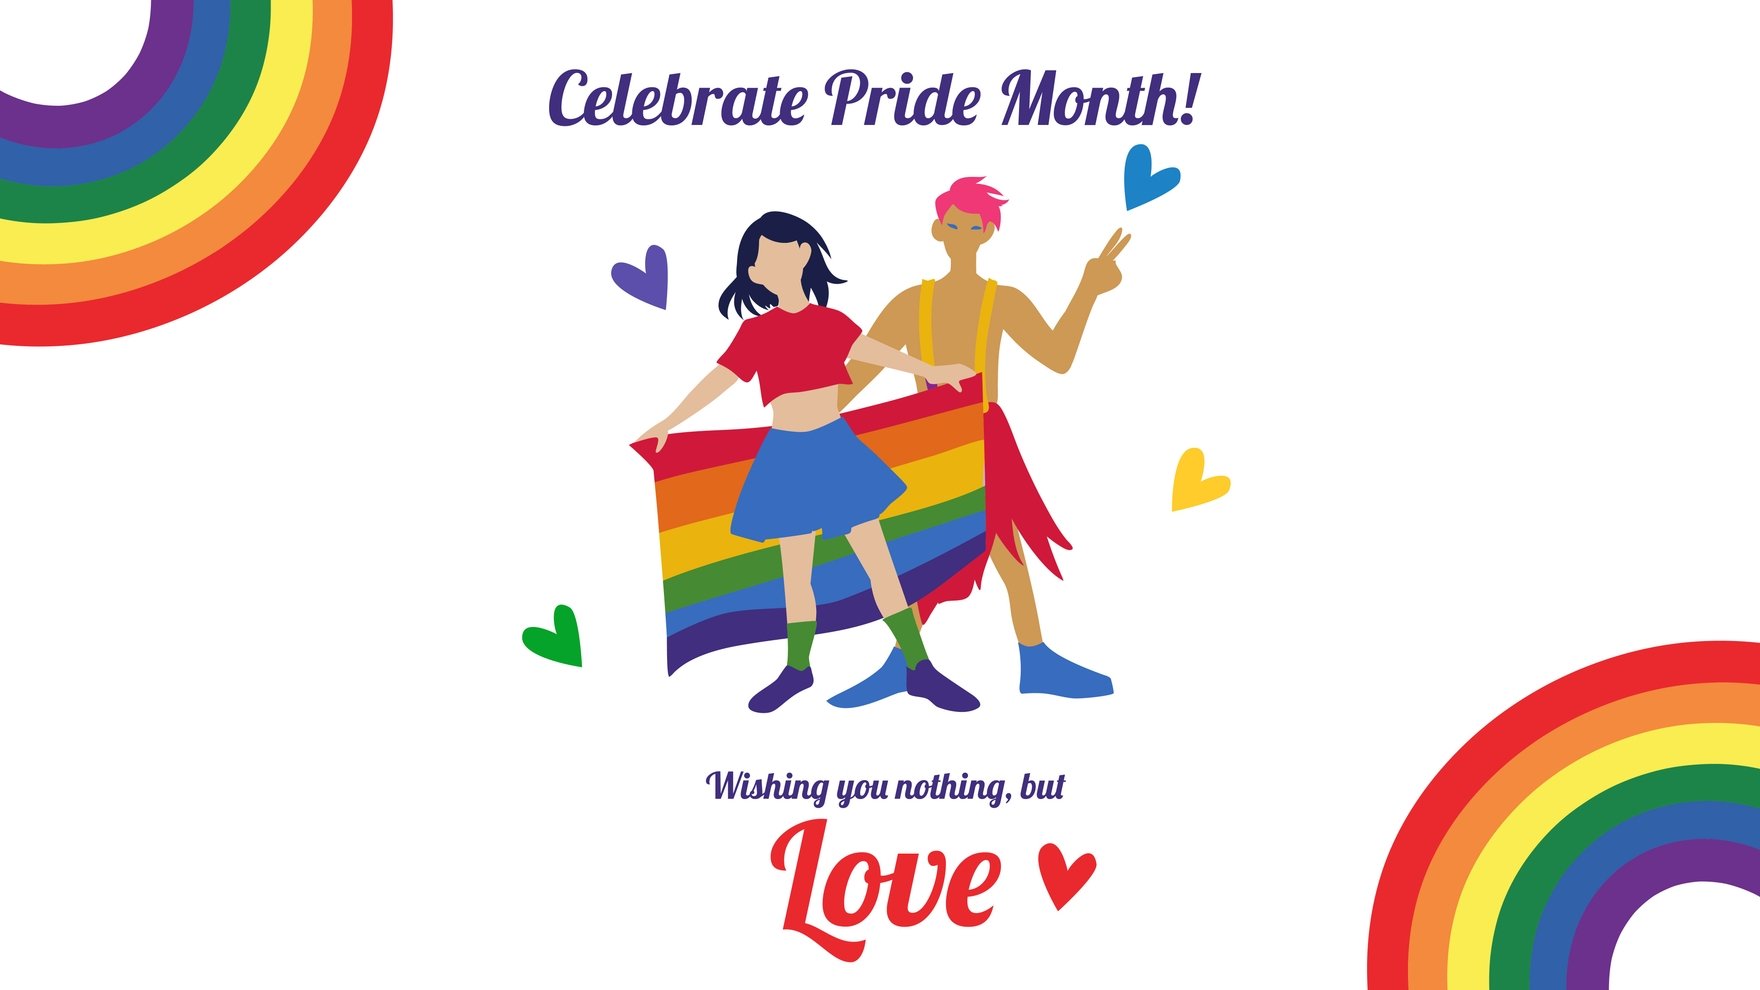 Free Pride Month Wishes Background in PDF, Illustrator, PSD, EPS, SVG, JPG, PNG